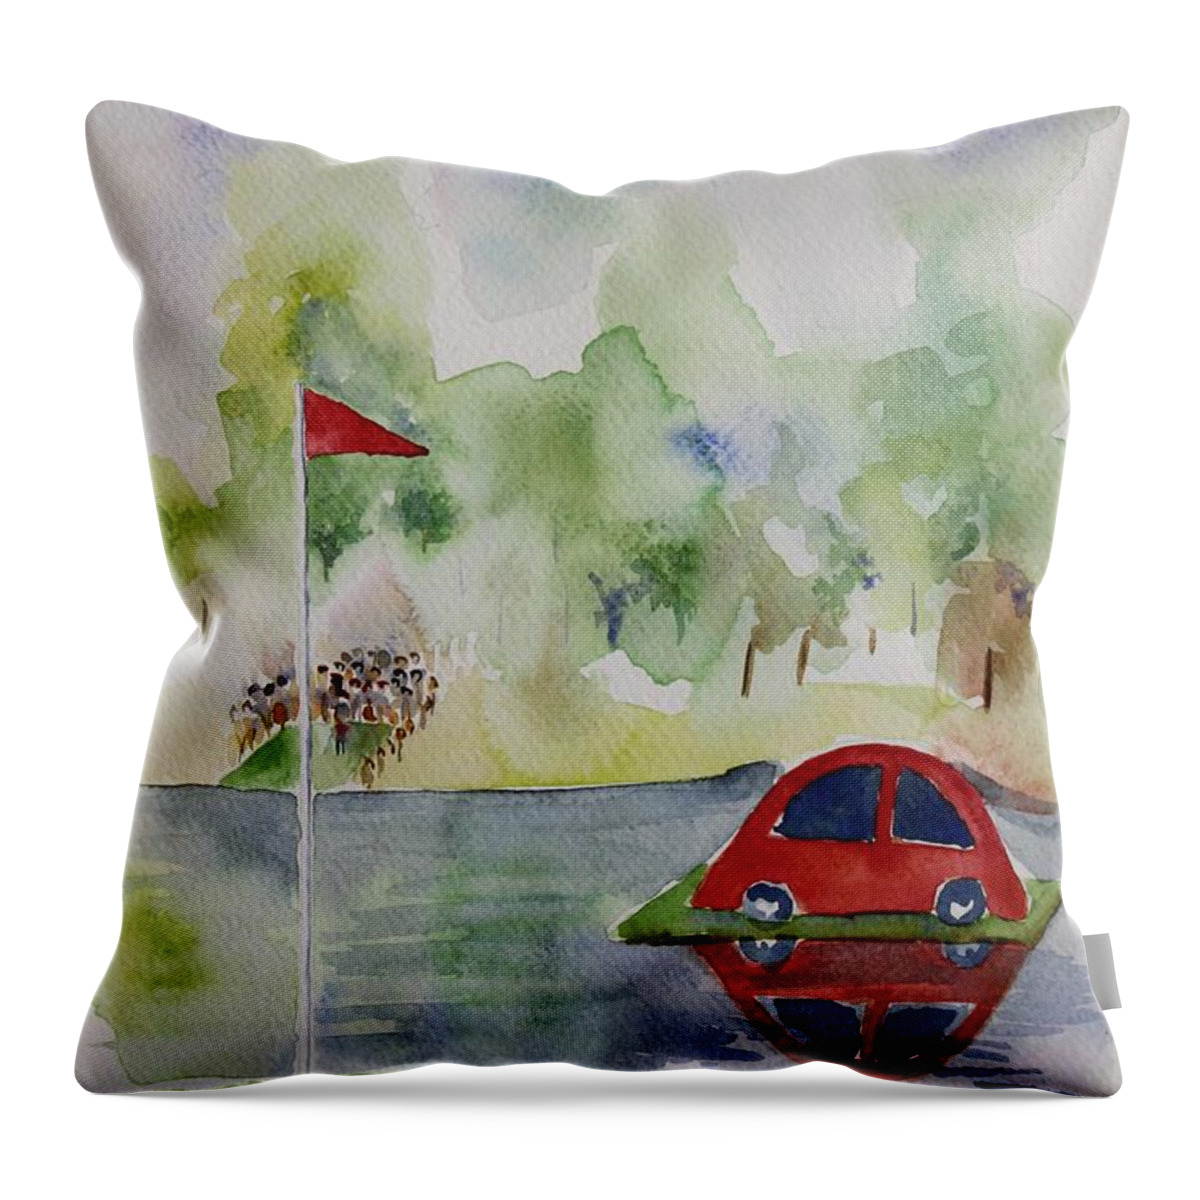 Holeinone Throw Pillow featuring the painting Hole in One Prize by Geeta Yerra